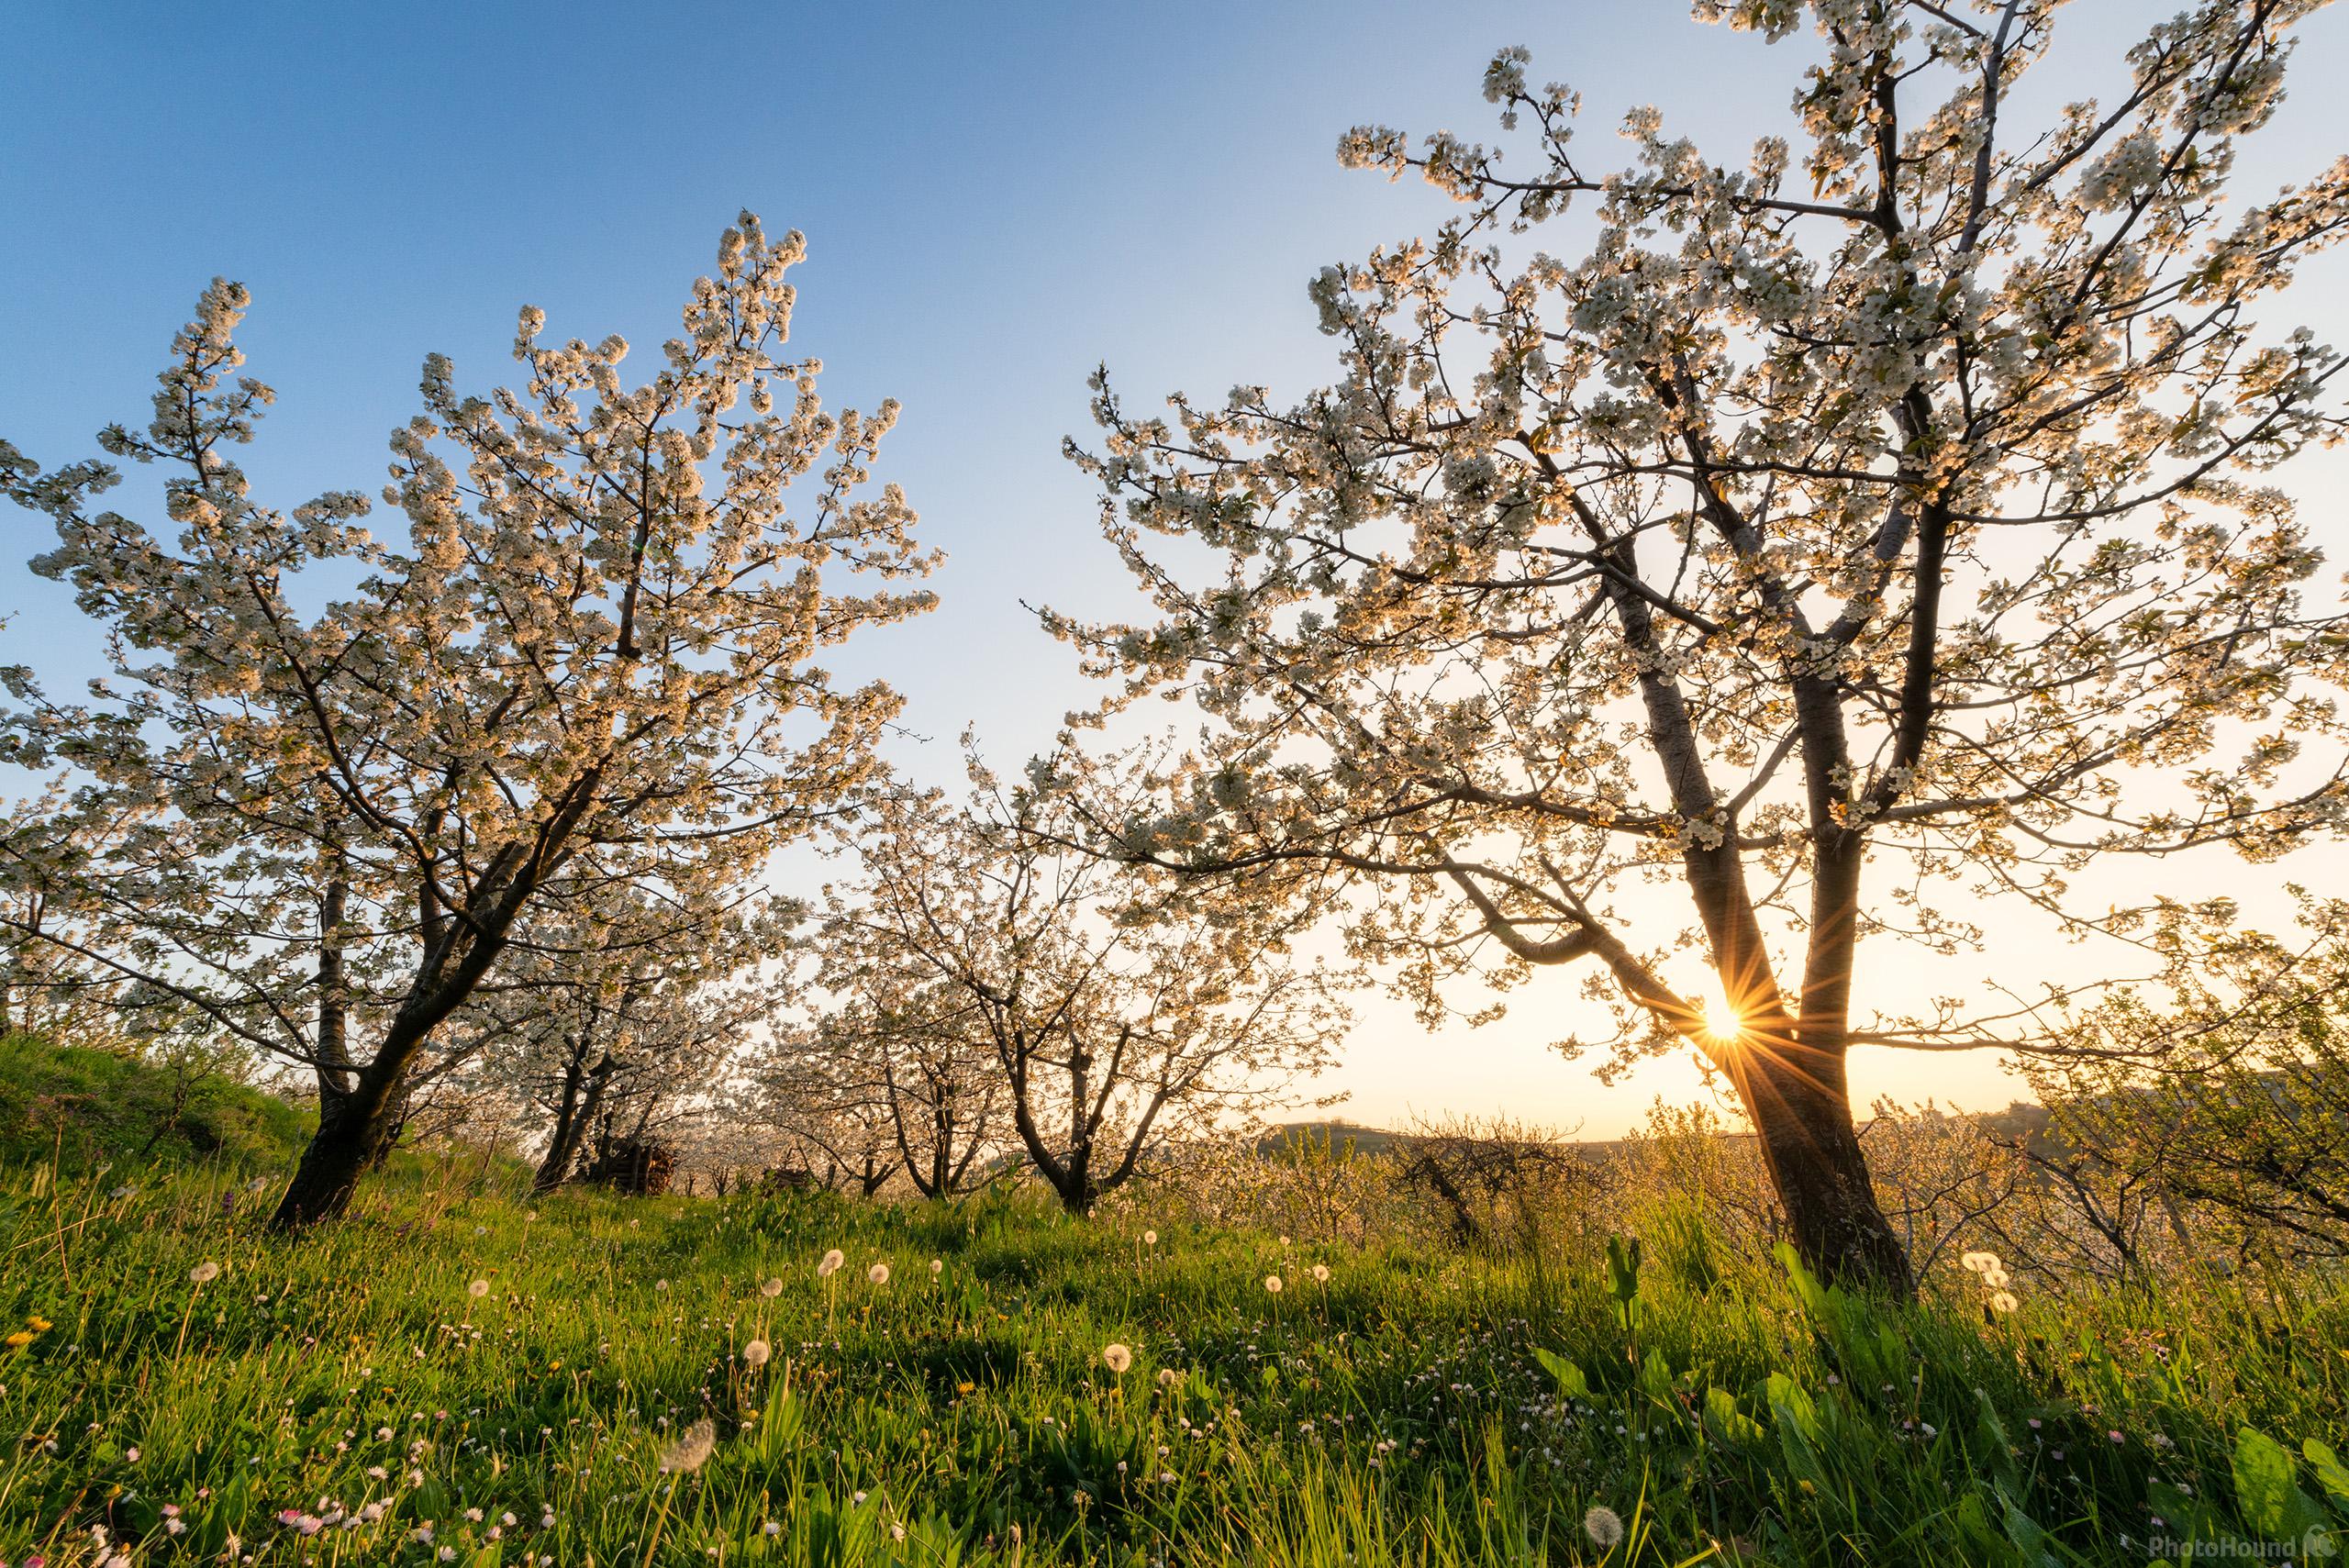 Image of Cherry Blossoms at Vedrijan by Luka Esenko